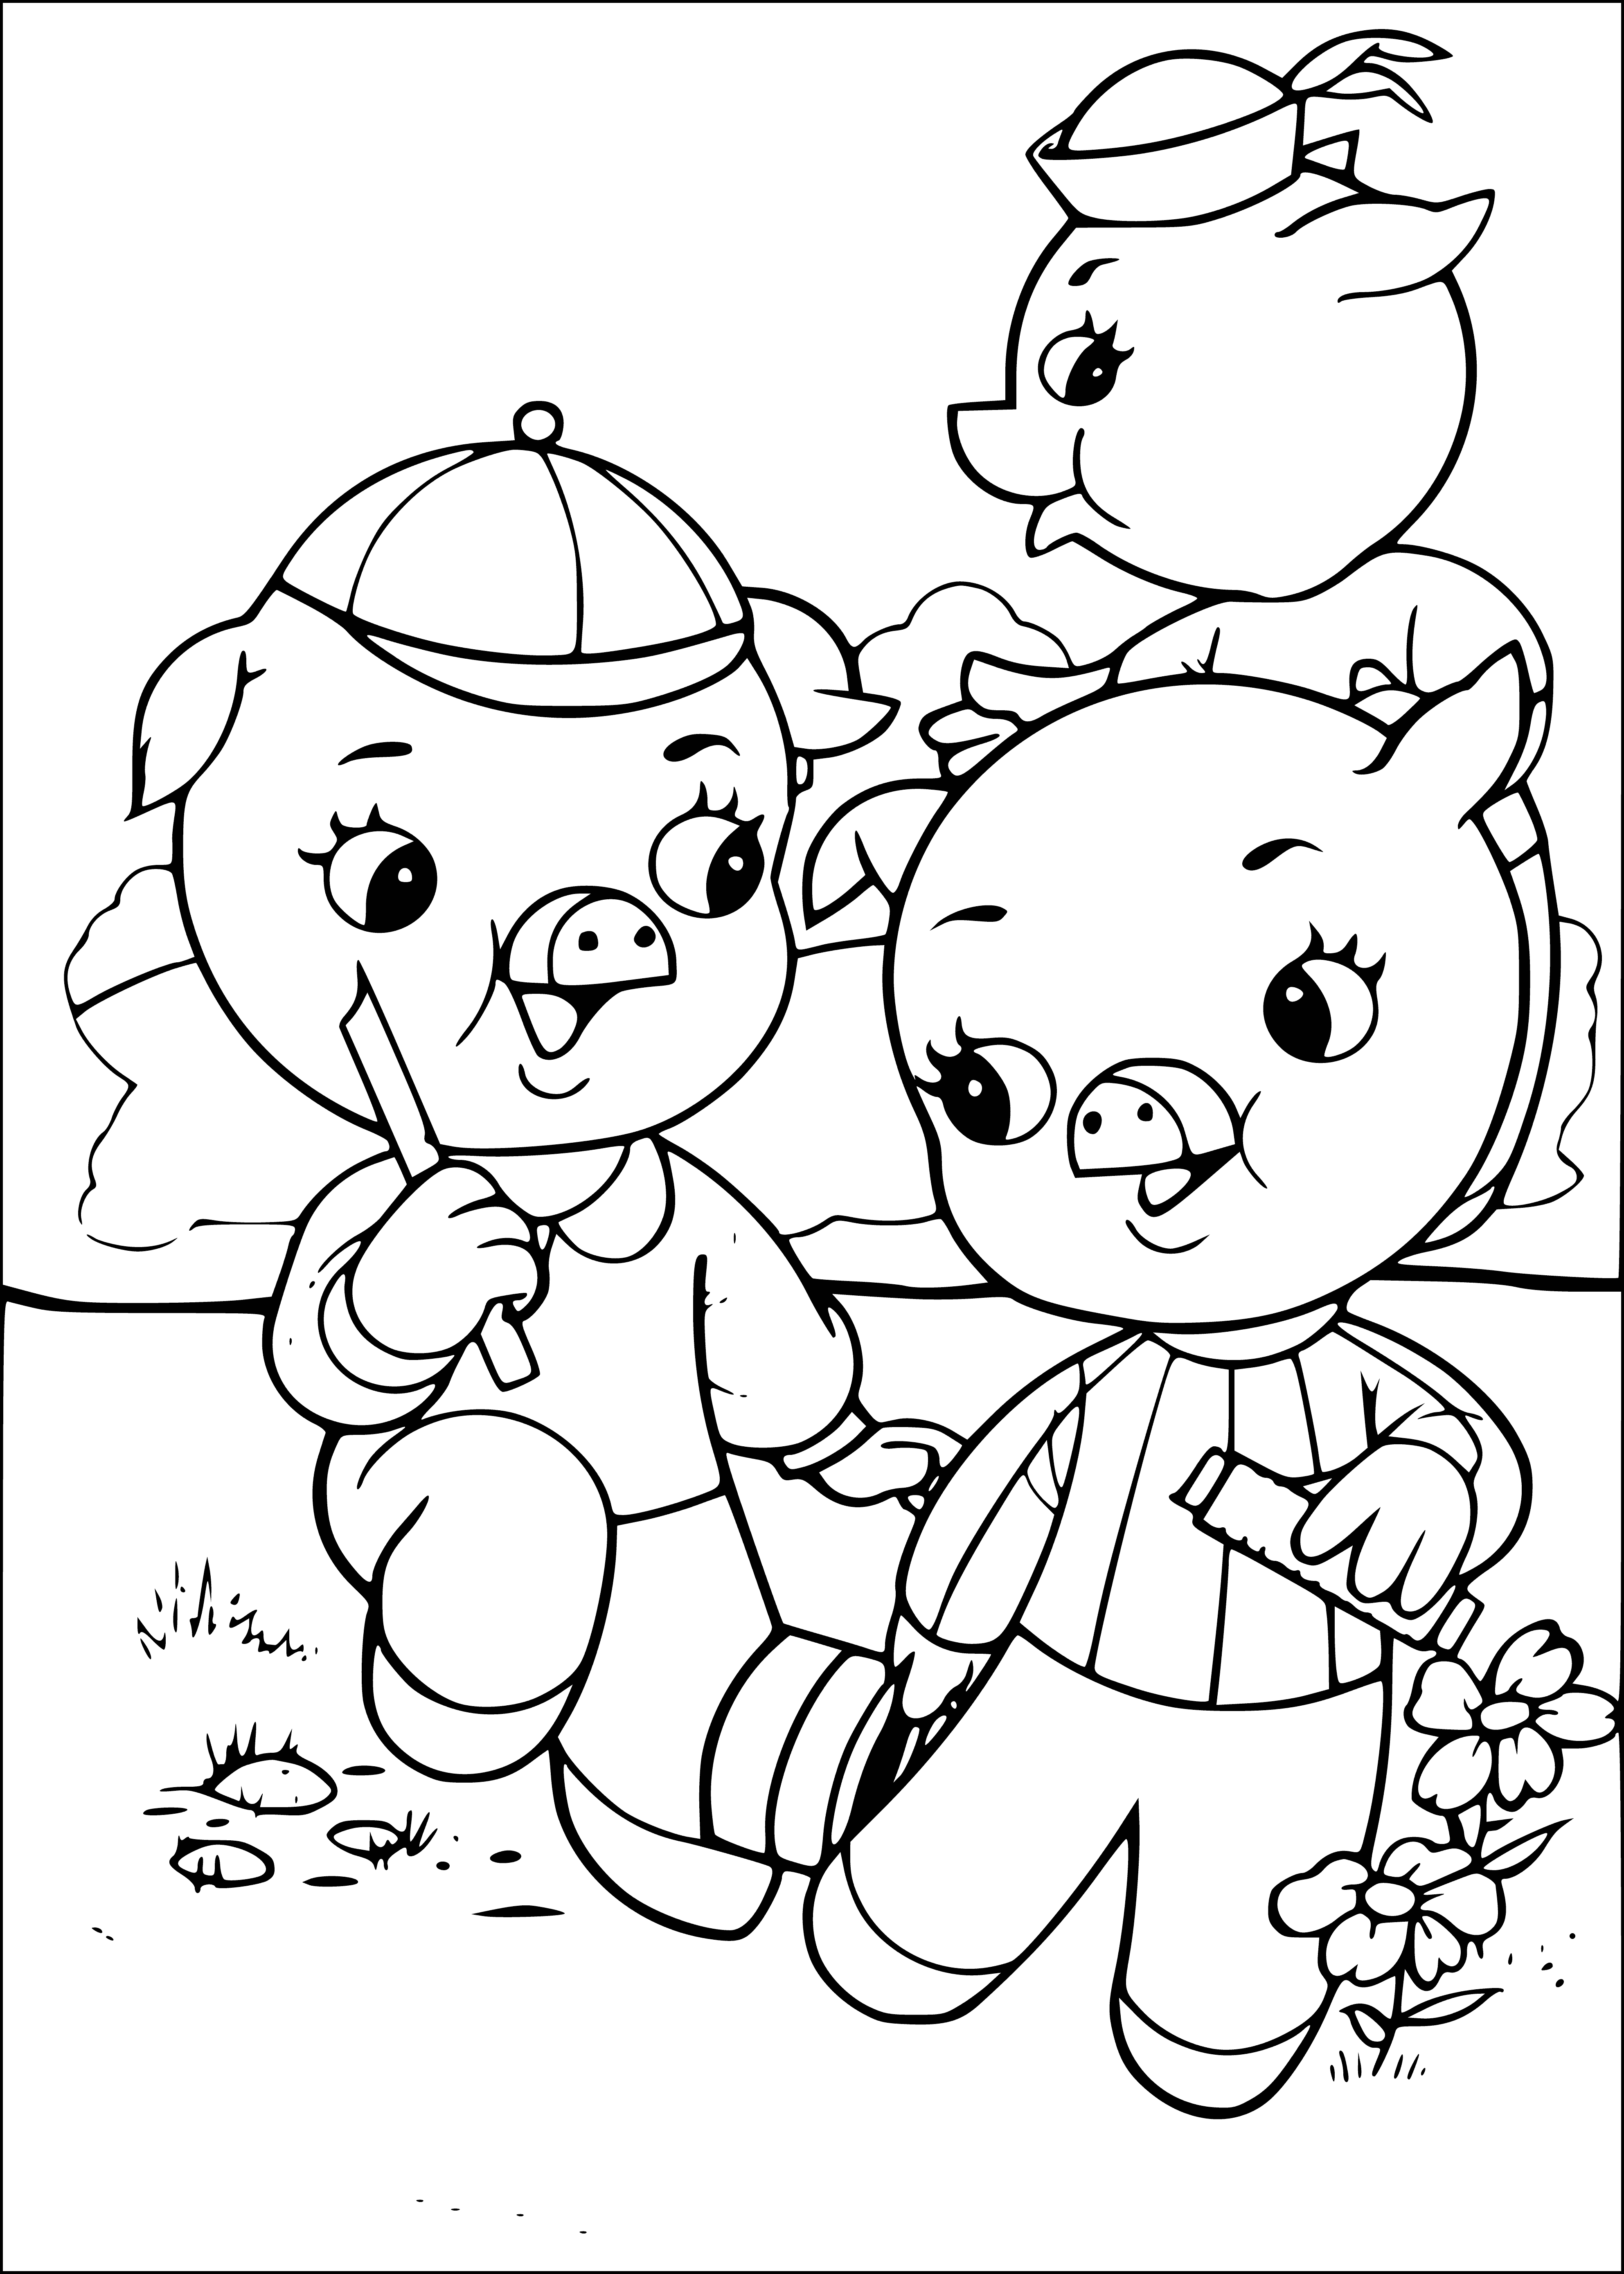 coloring page: 3 pigs in a coloring page, 2 standing next to each other & one behind, all with mouths open.